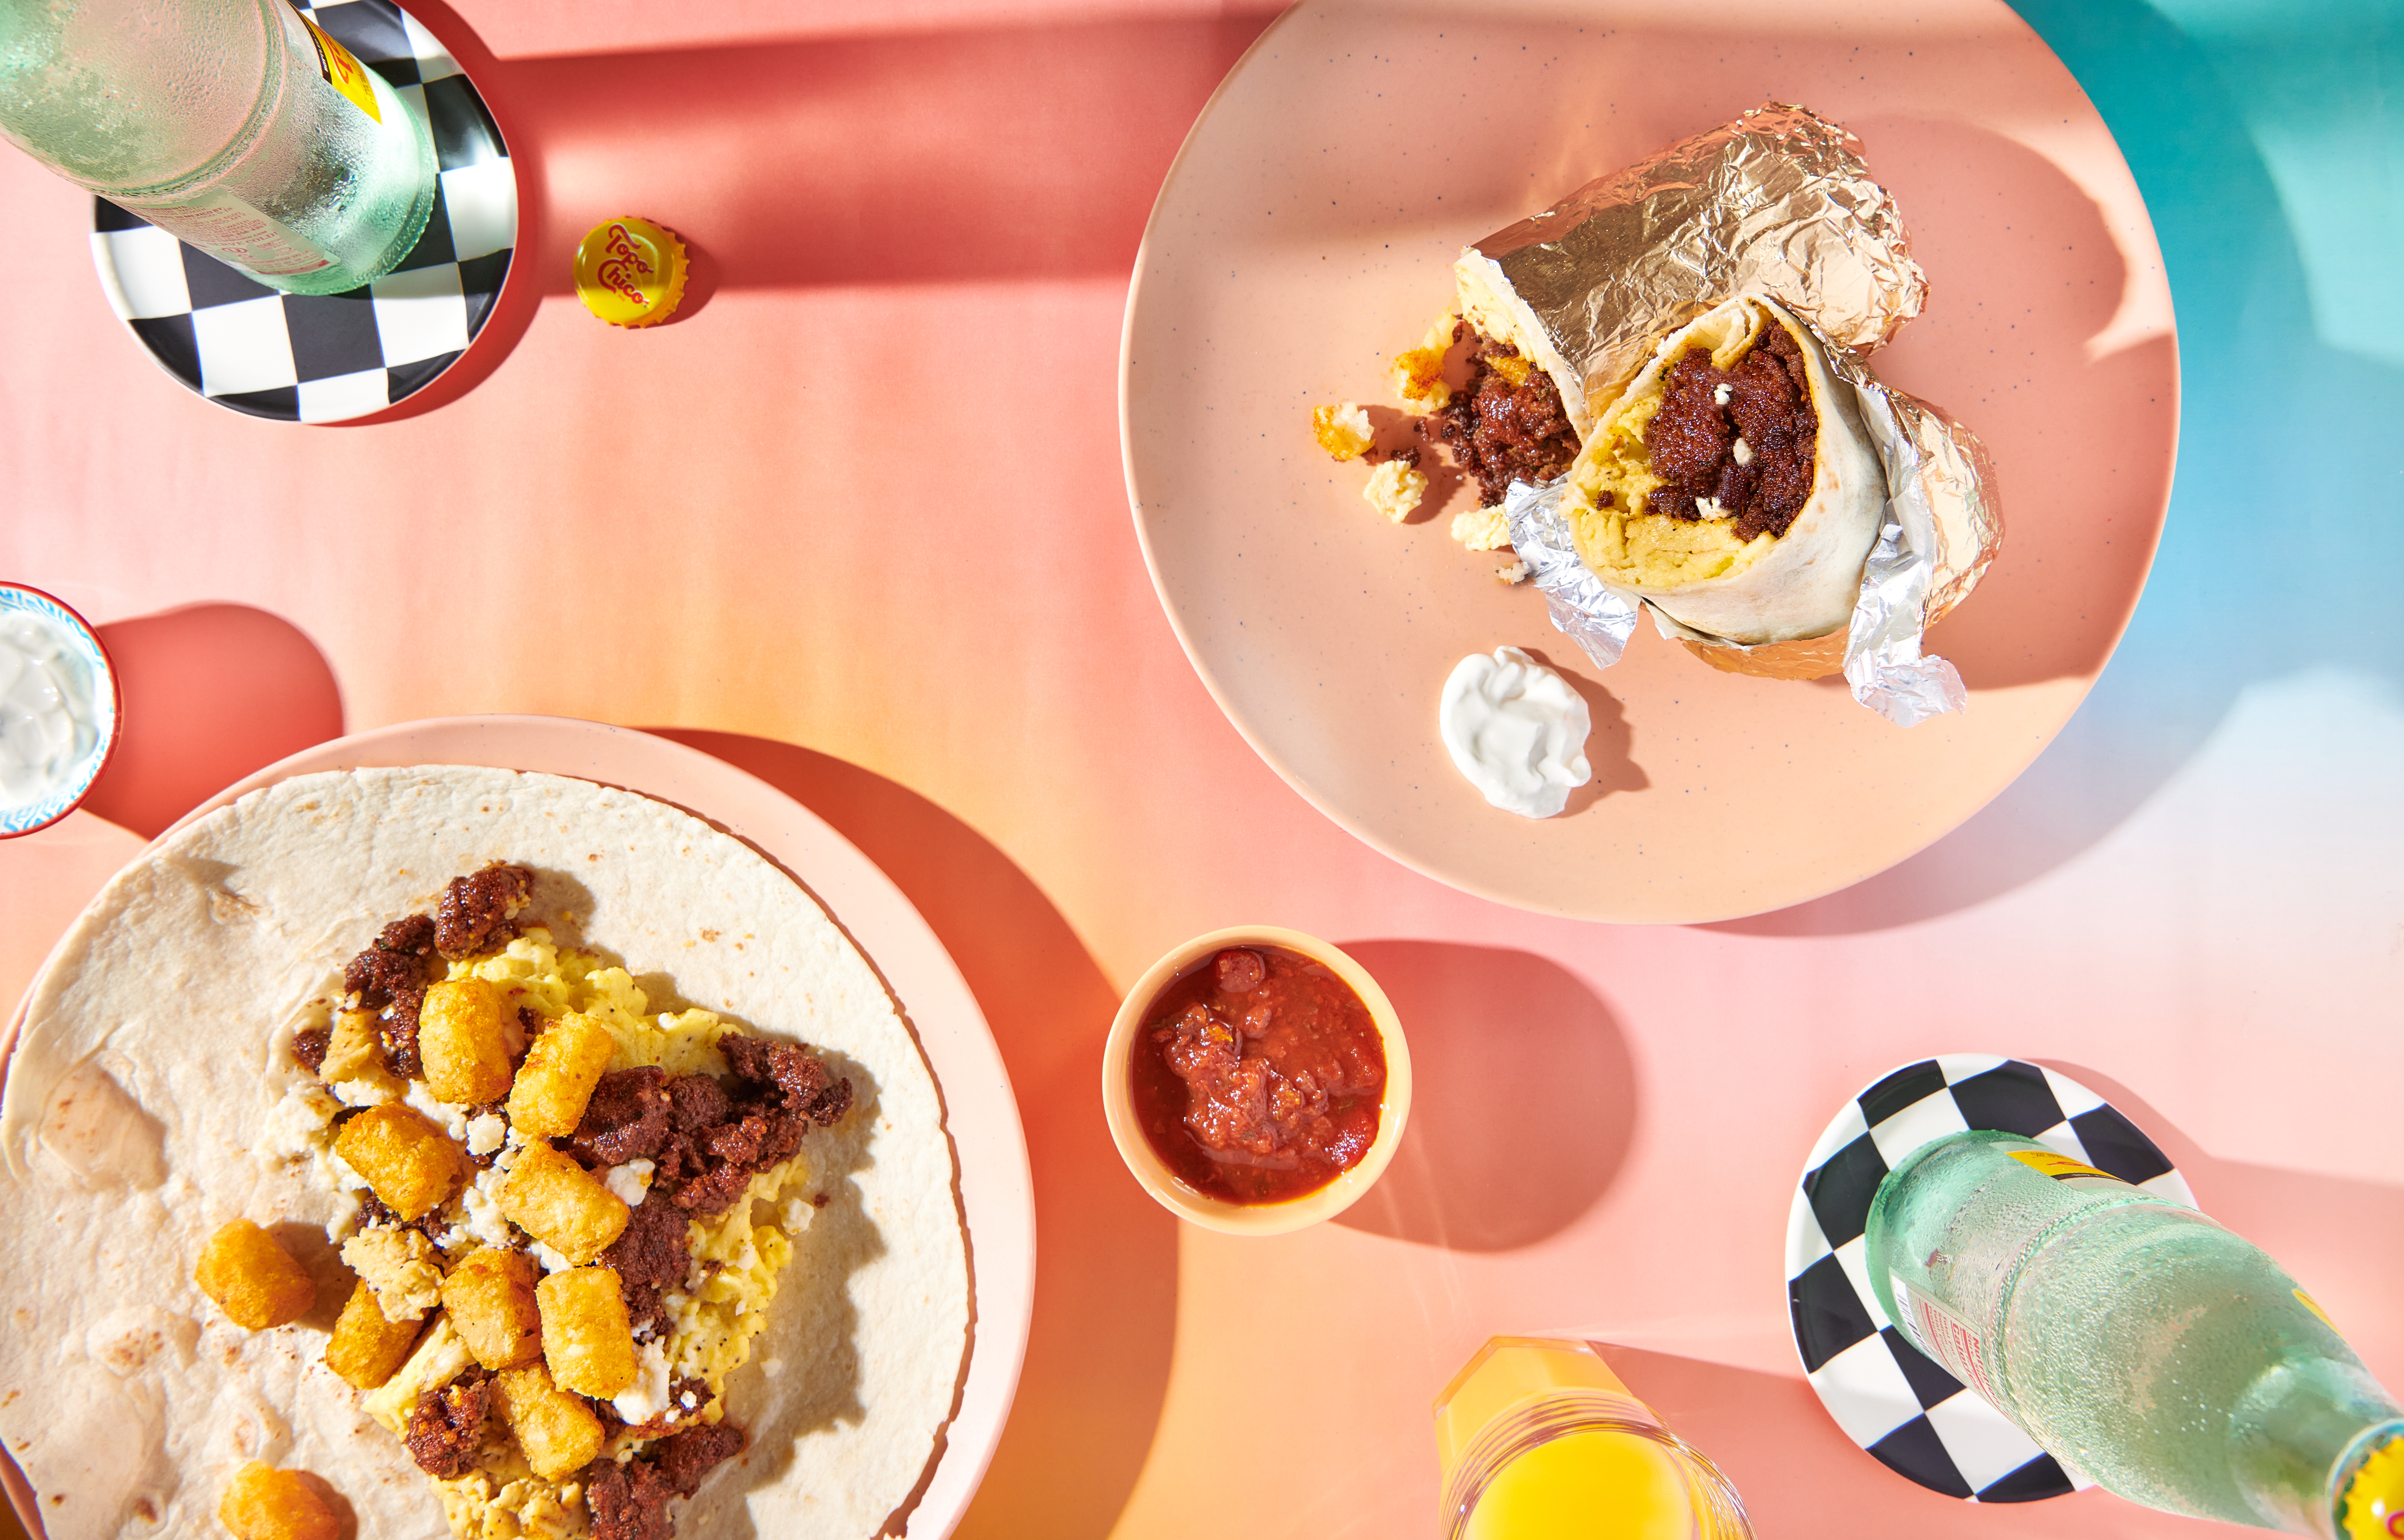 Breakfast burritos served alongside a small bowl of red salsa.